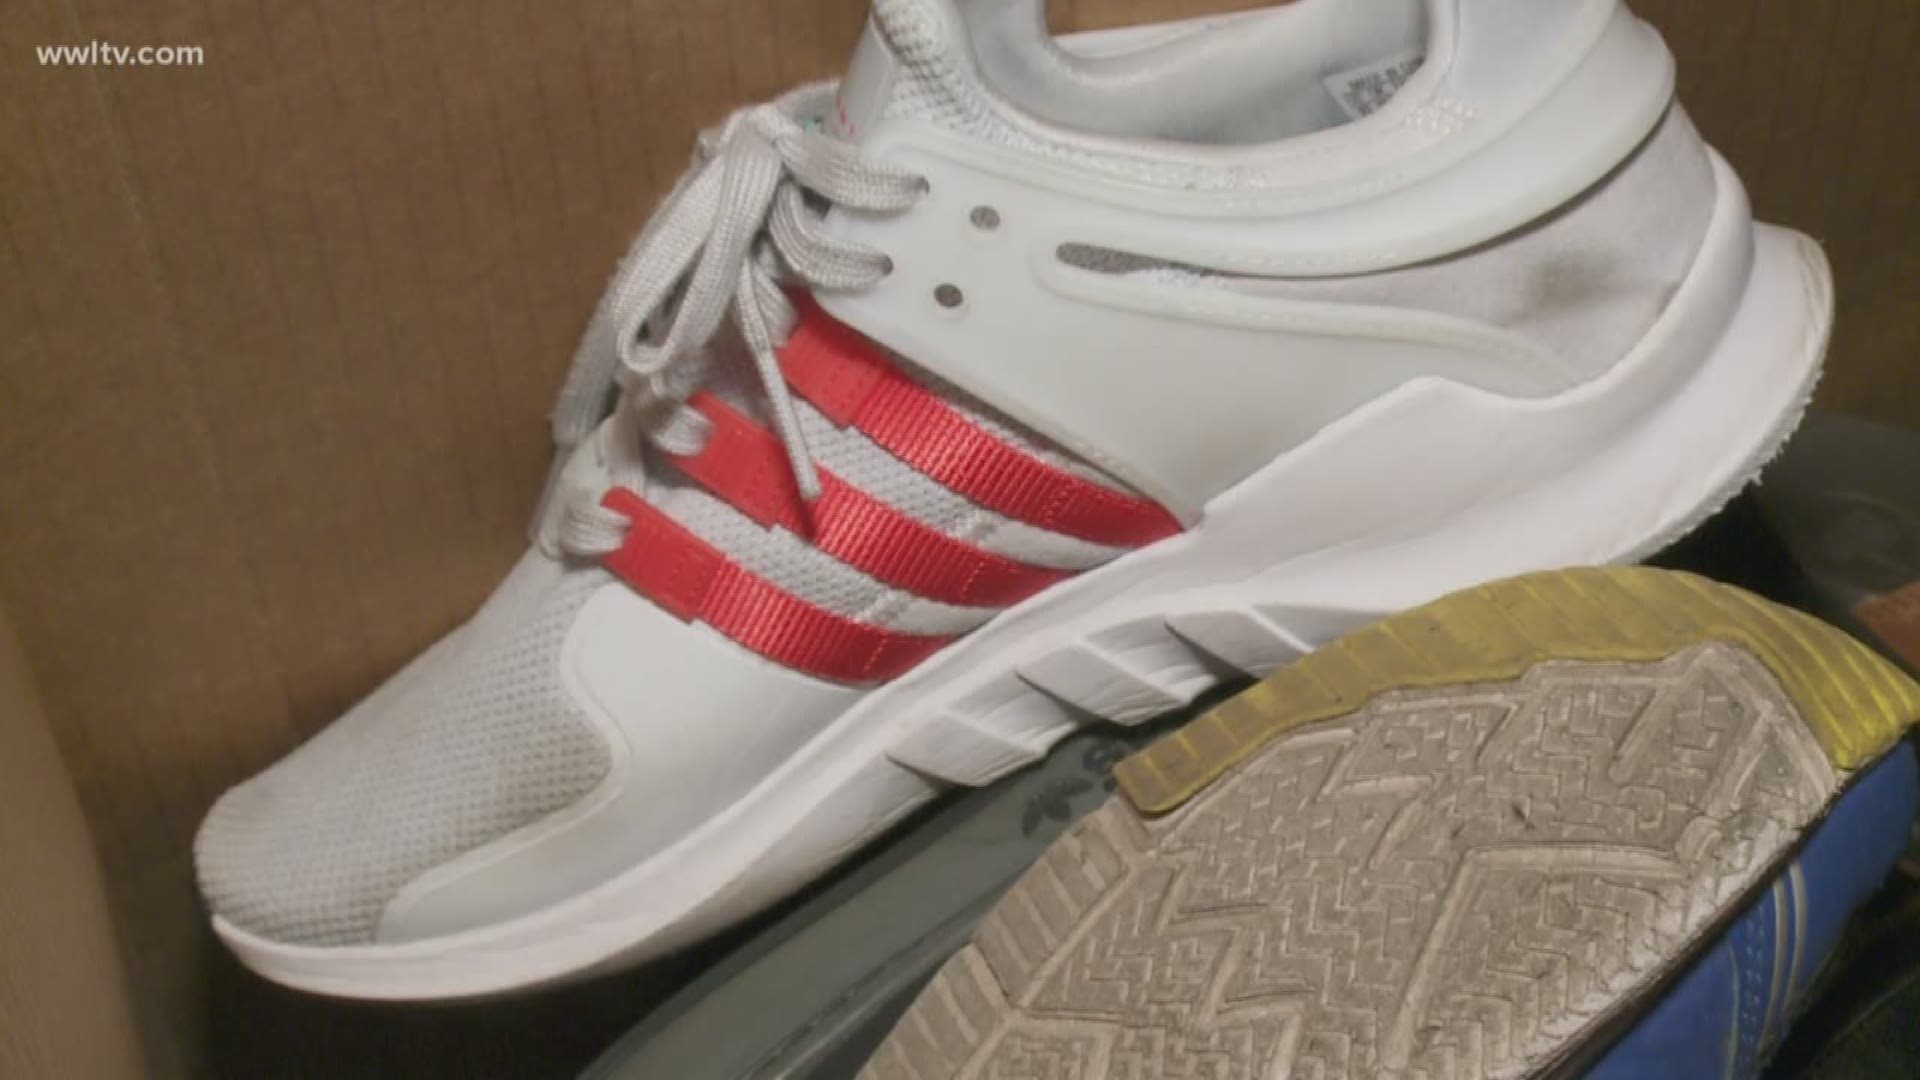 A non-profit program called Kicks for the City is collecting shoes for the homeless. It's a part of an international effort to provide sneakers and shoes to the needy.